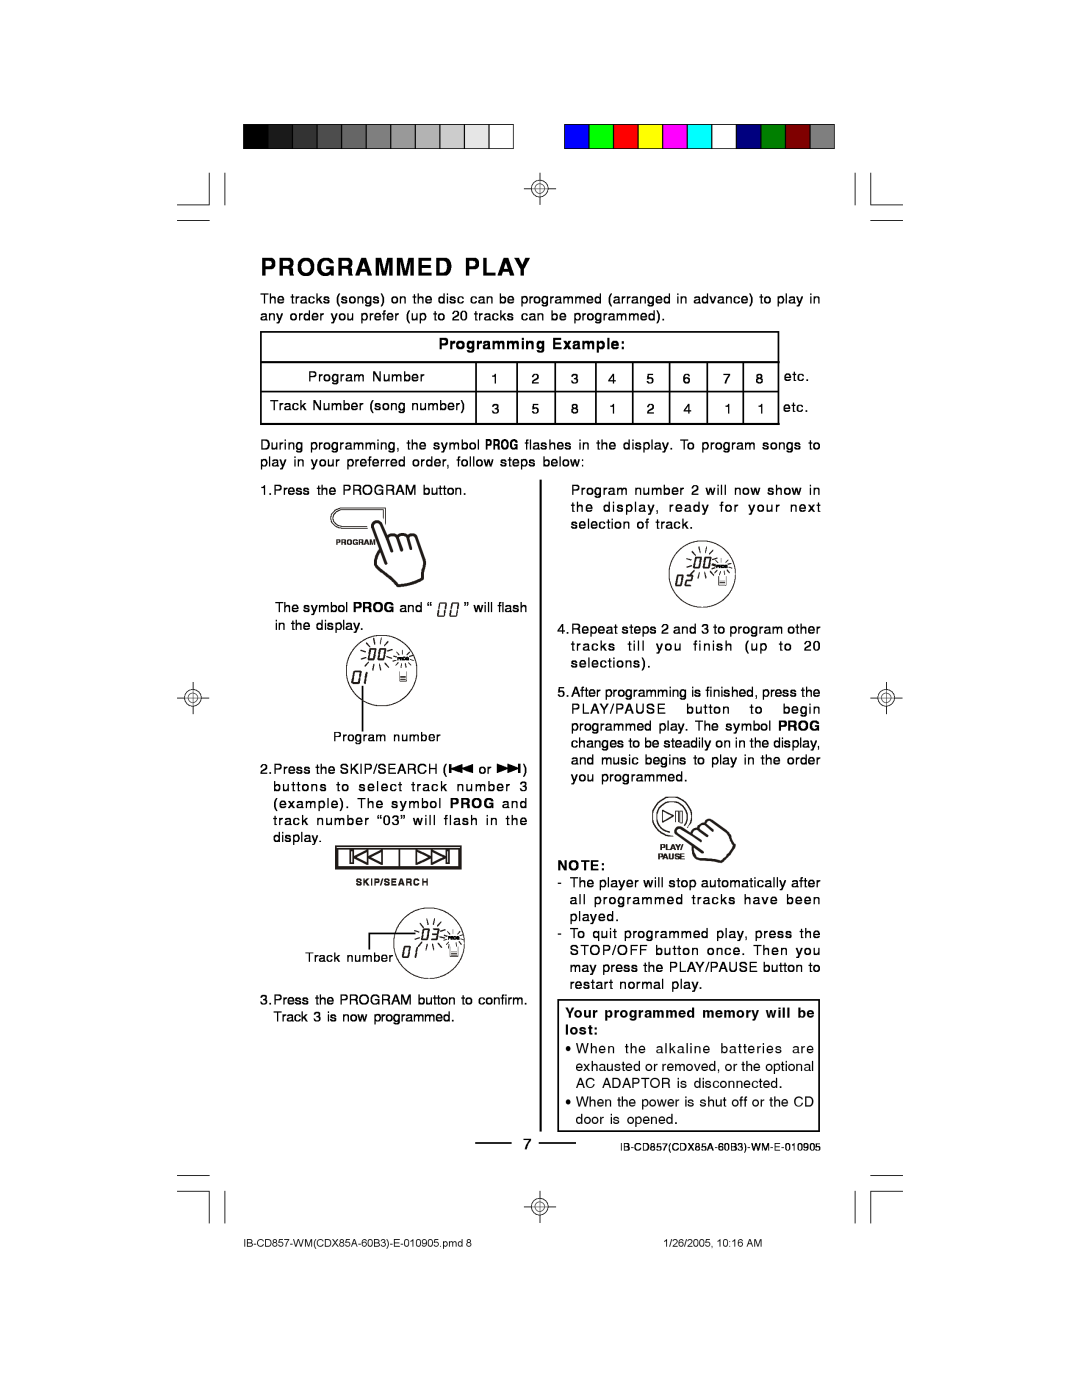 Lenoxx Electronics CD-857 manual Programmed Play, Programming Example, Your programmed memory will be lost 